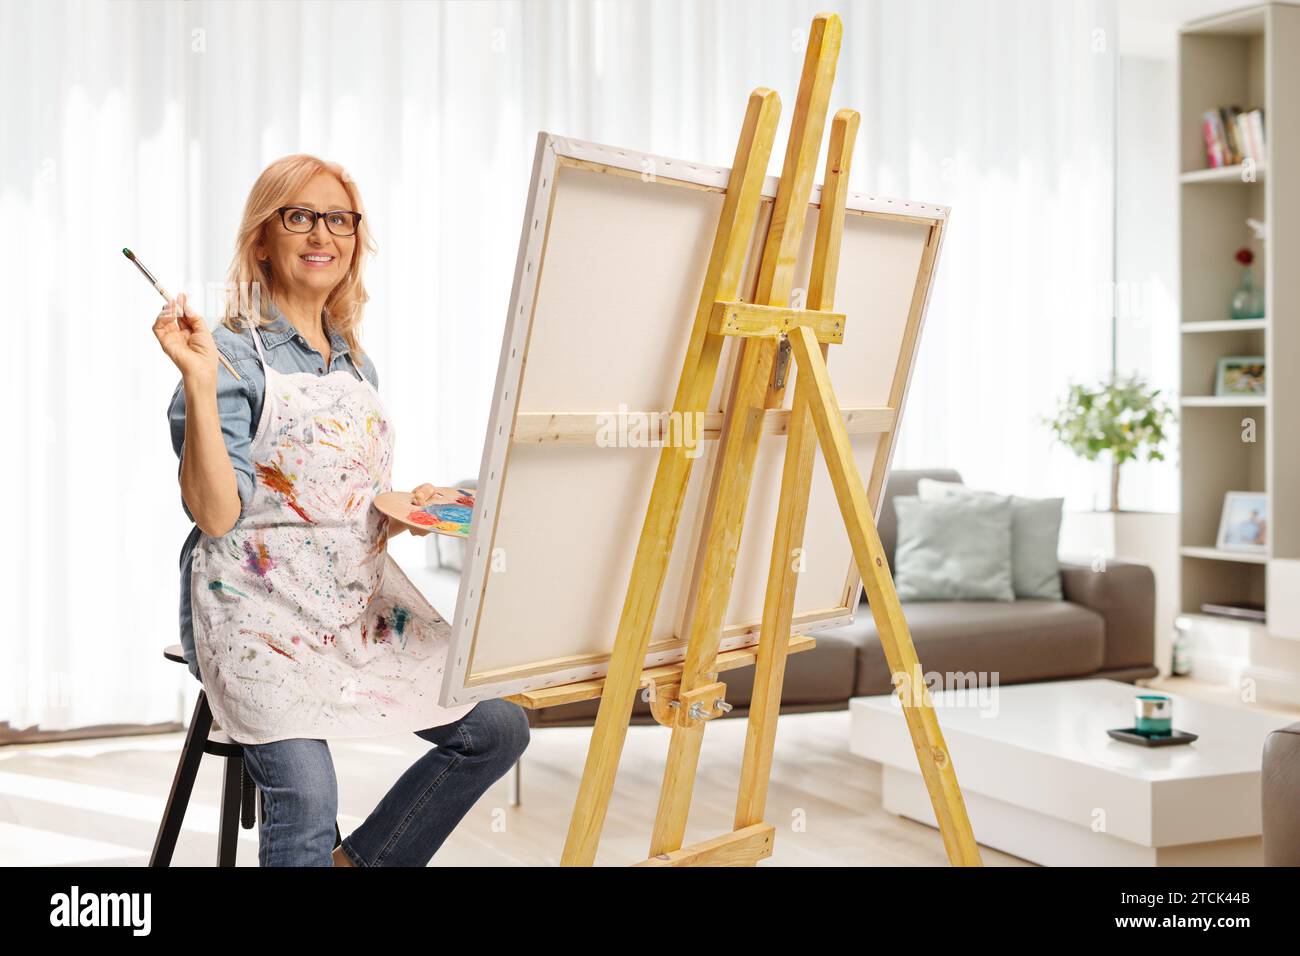 Woman sitting on a chair holding a painting brush and color palette in front of a canvas at home Stock Photo